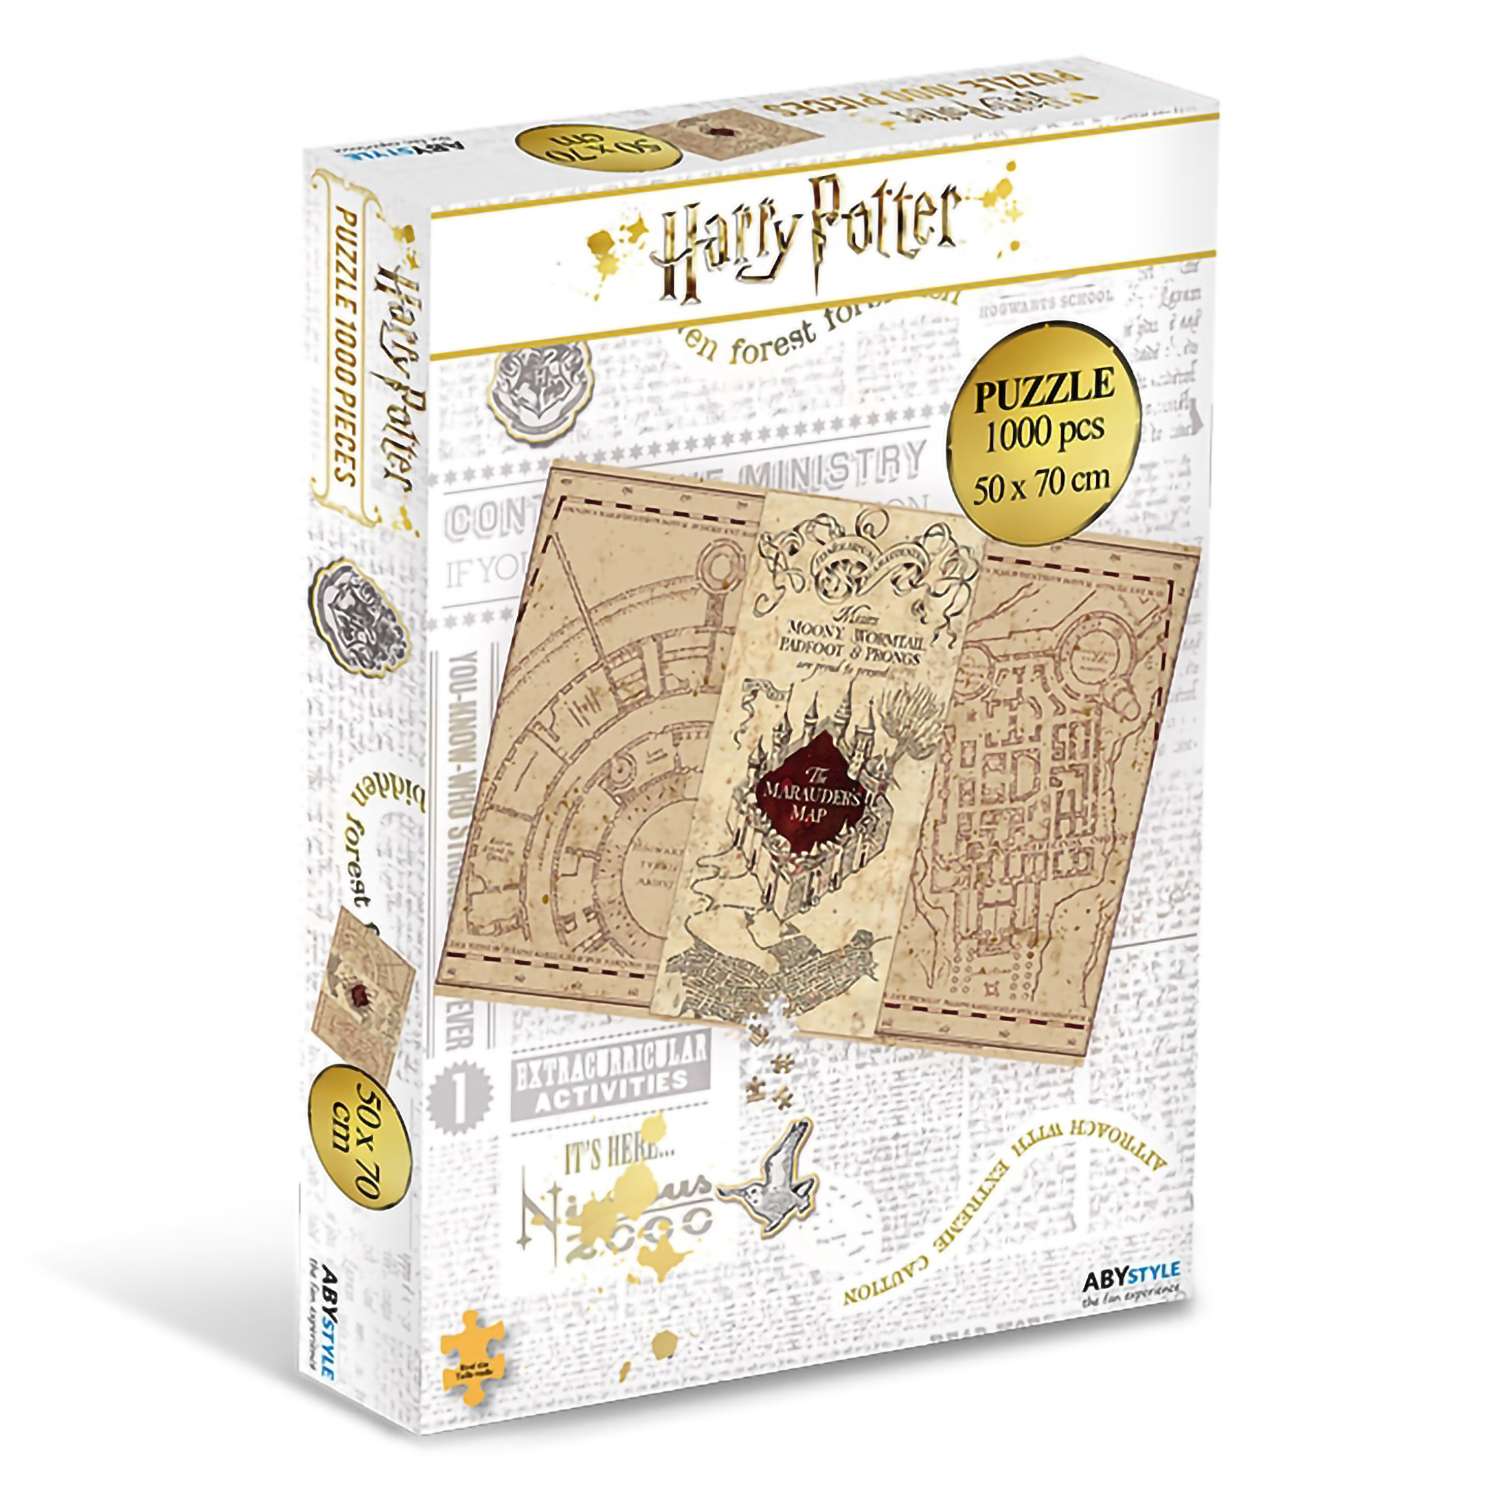 Пазл ABYStyle Harry Potter Jigsaw puzzle 1000 pieces Marauders Map ABYJDP002 - фото 2